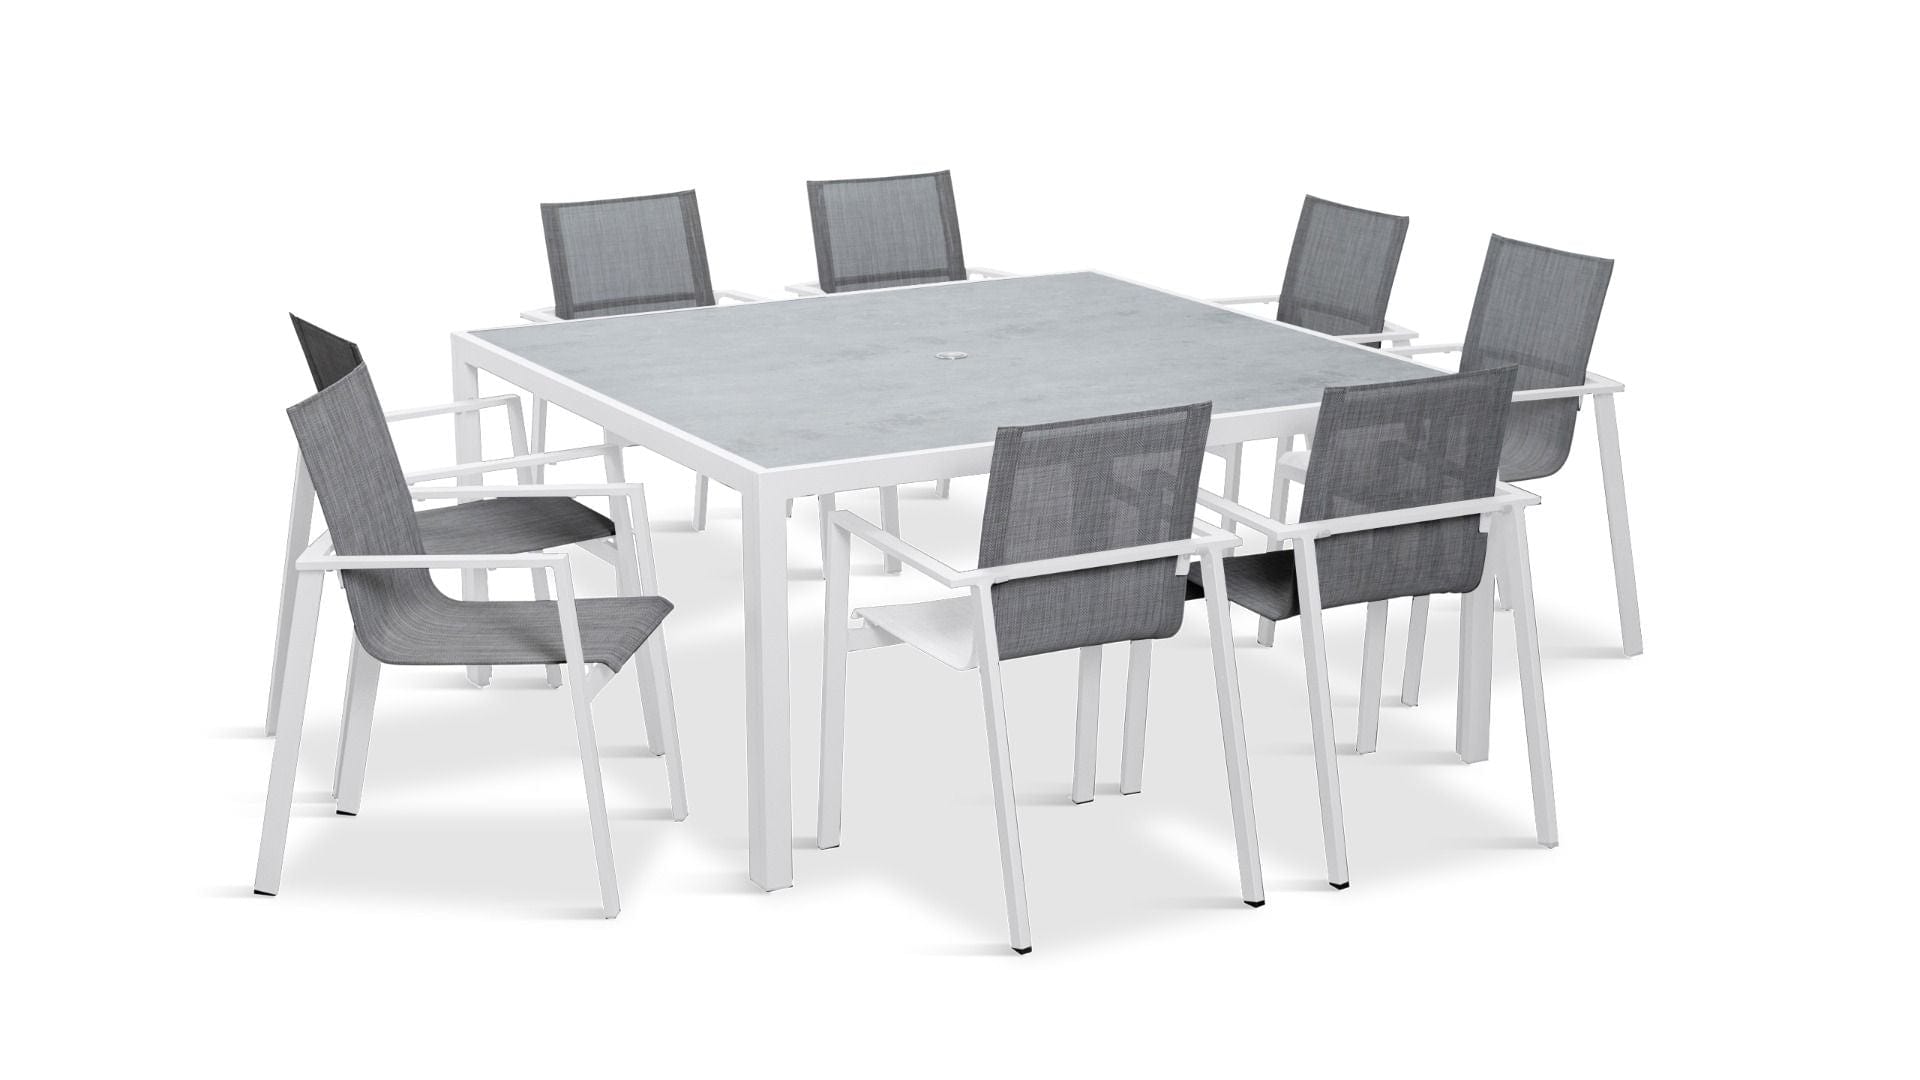 Harmonia Living Outdoor Dining Set White Harmonia Living - Lift 9 Piece Square Dining Set - Black/Black | 8 Lift Dining Arm Chairs - Black | 1 Staple 8-Seater Square Dining Table - Black | HL-LIFT-BK-9SDS